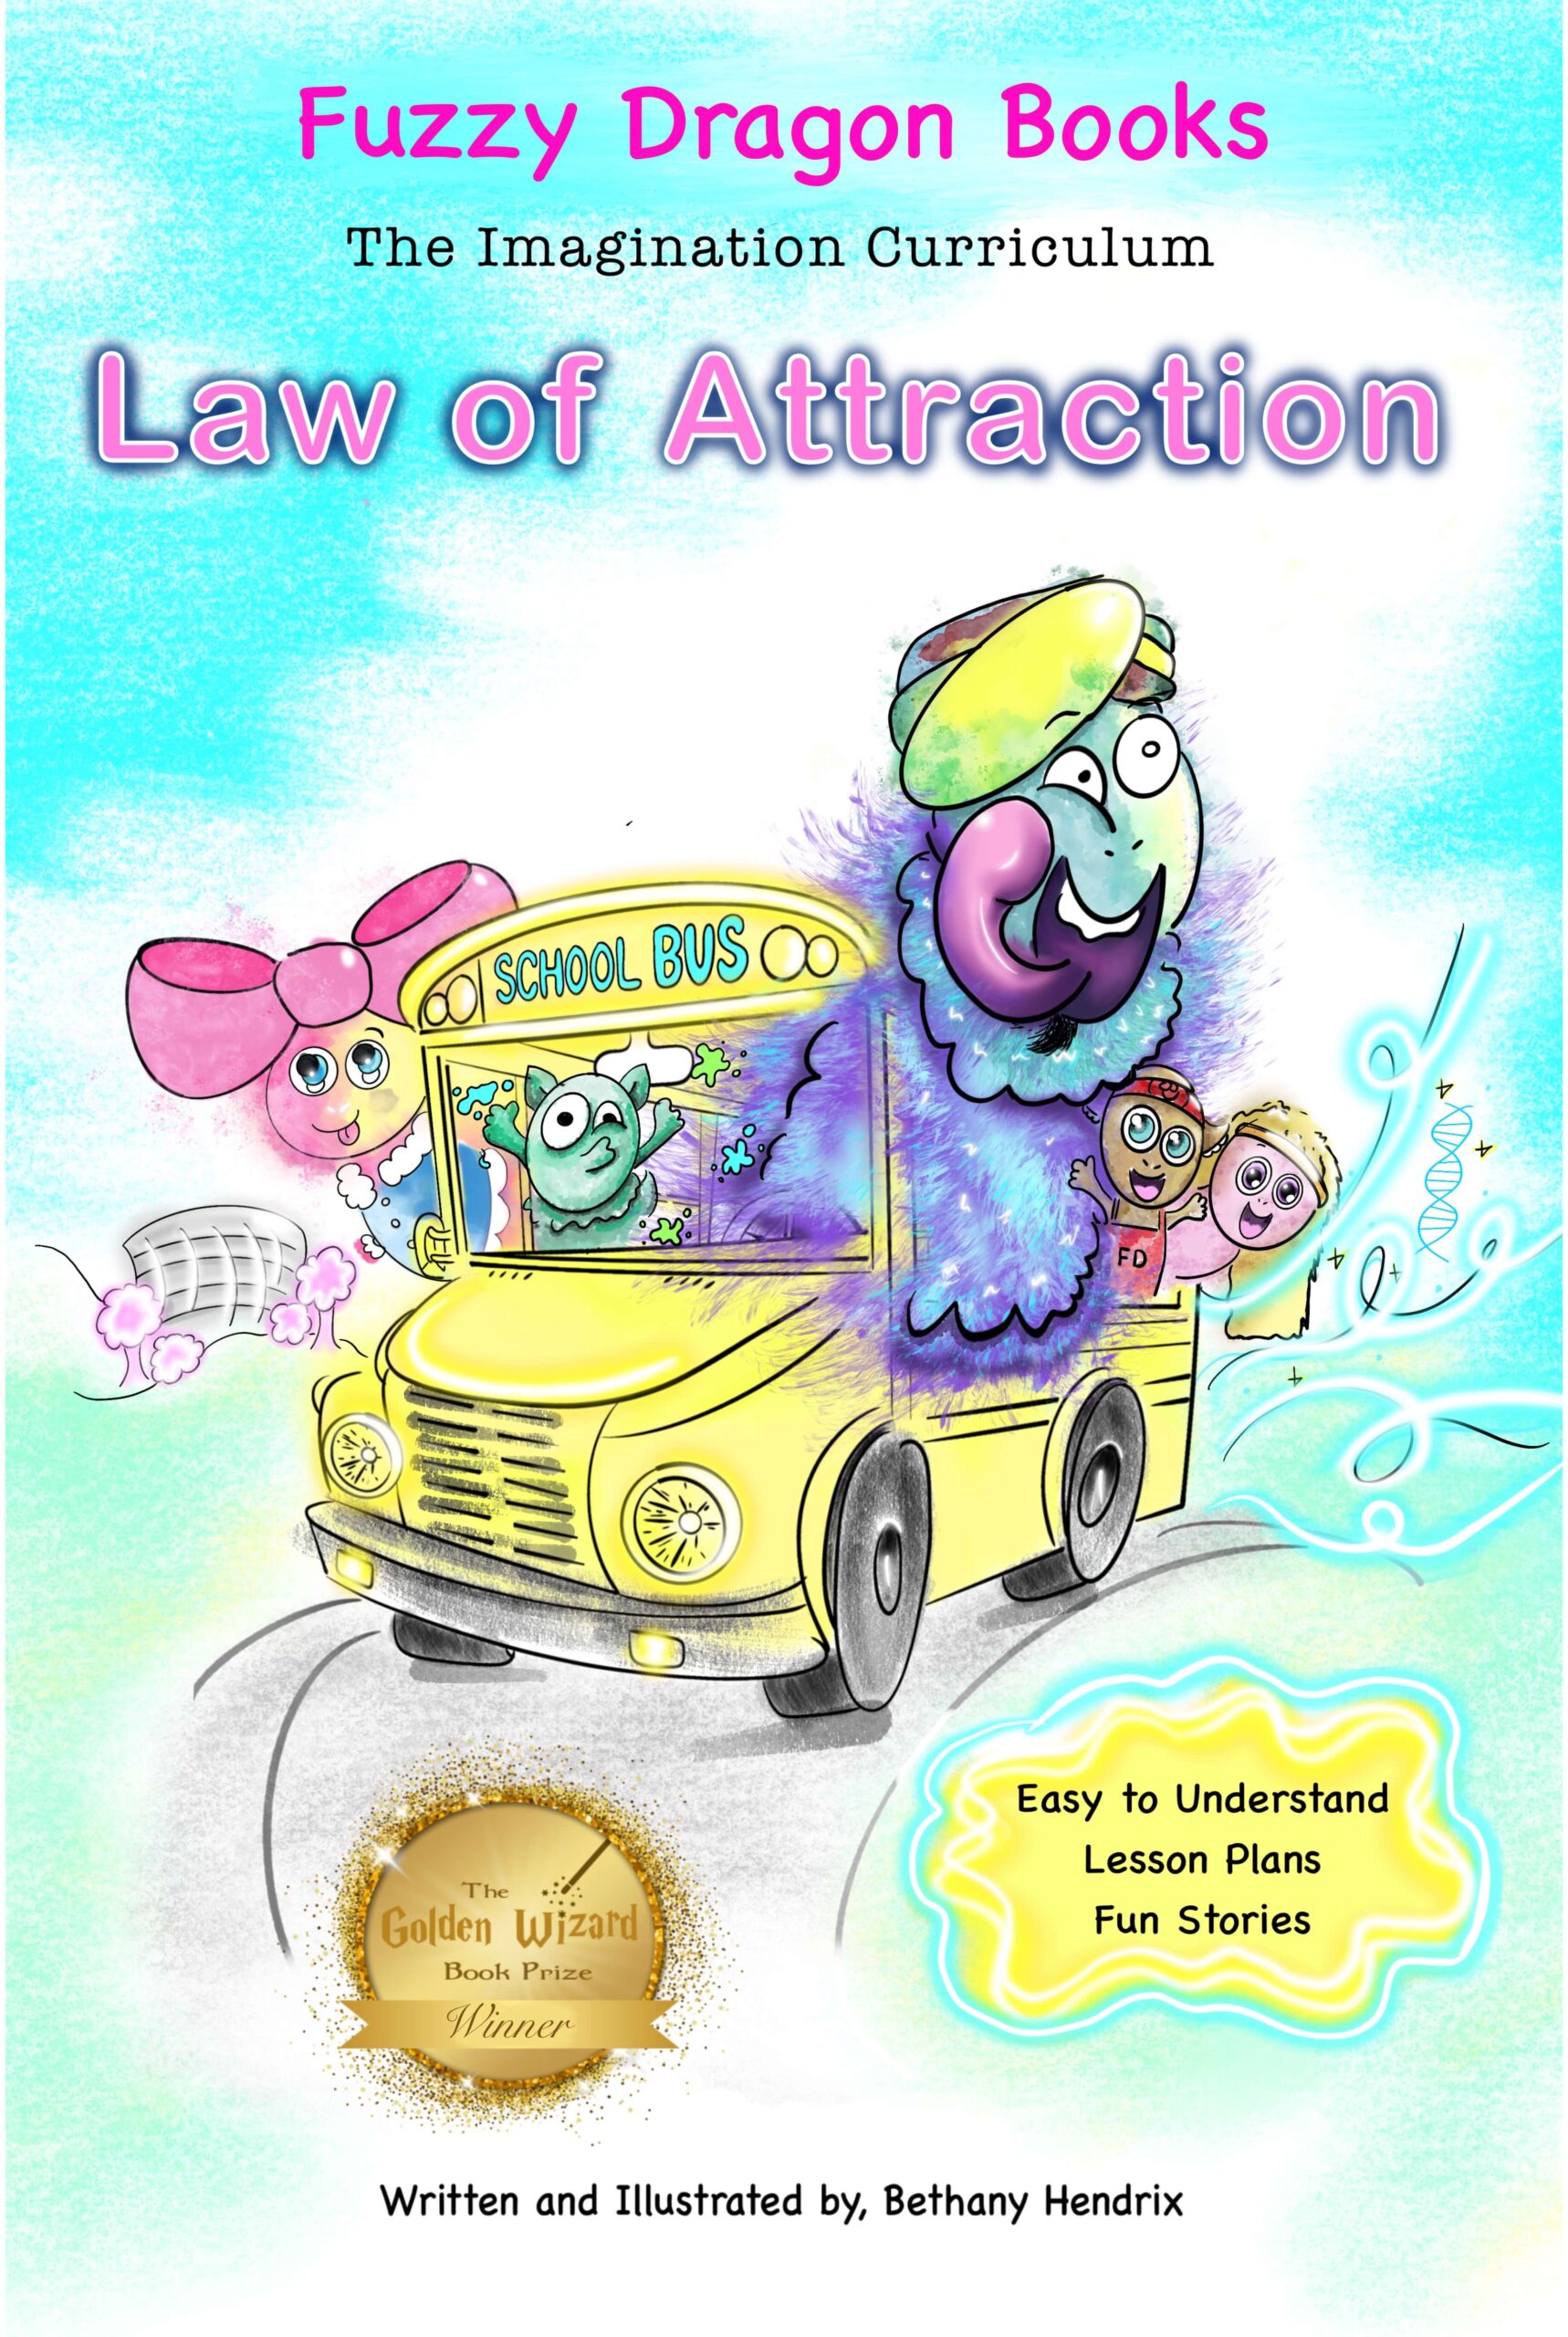 Award winning children's book Fuzzy Dragon Books The Imagination Curriculum: Law of Attraction